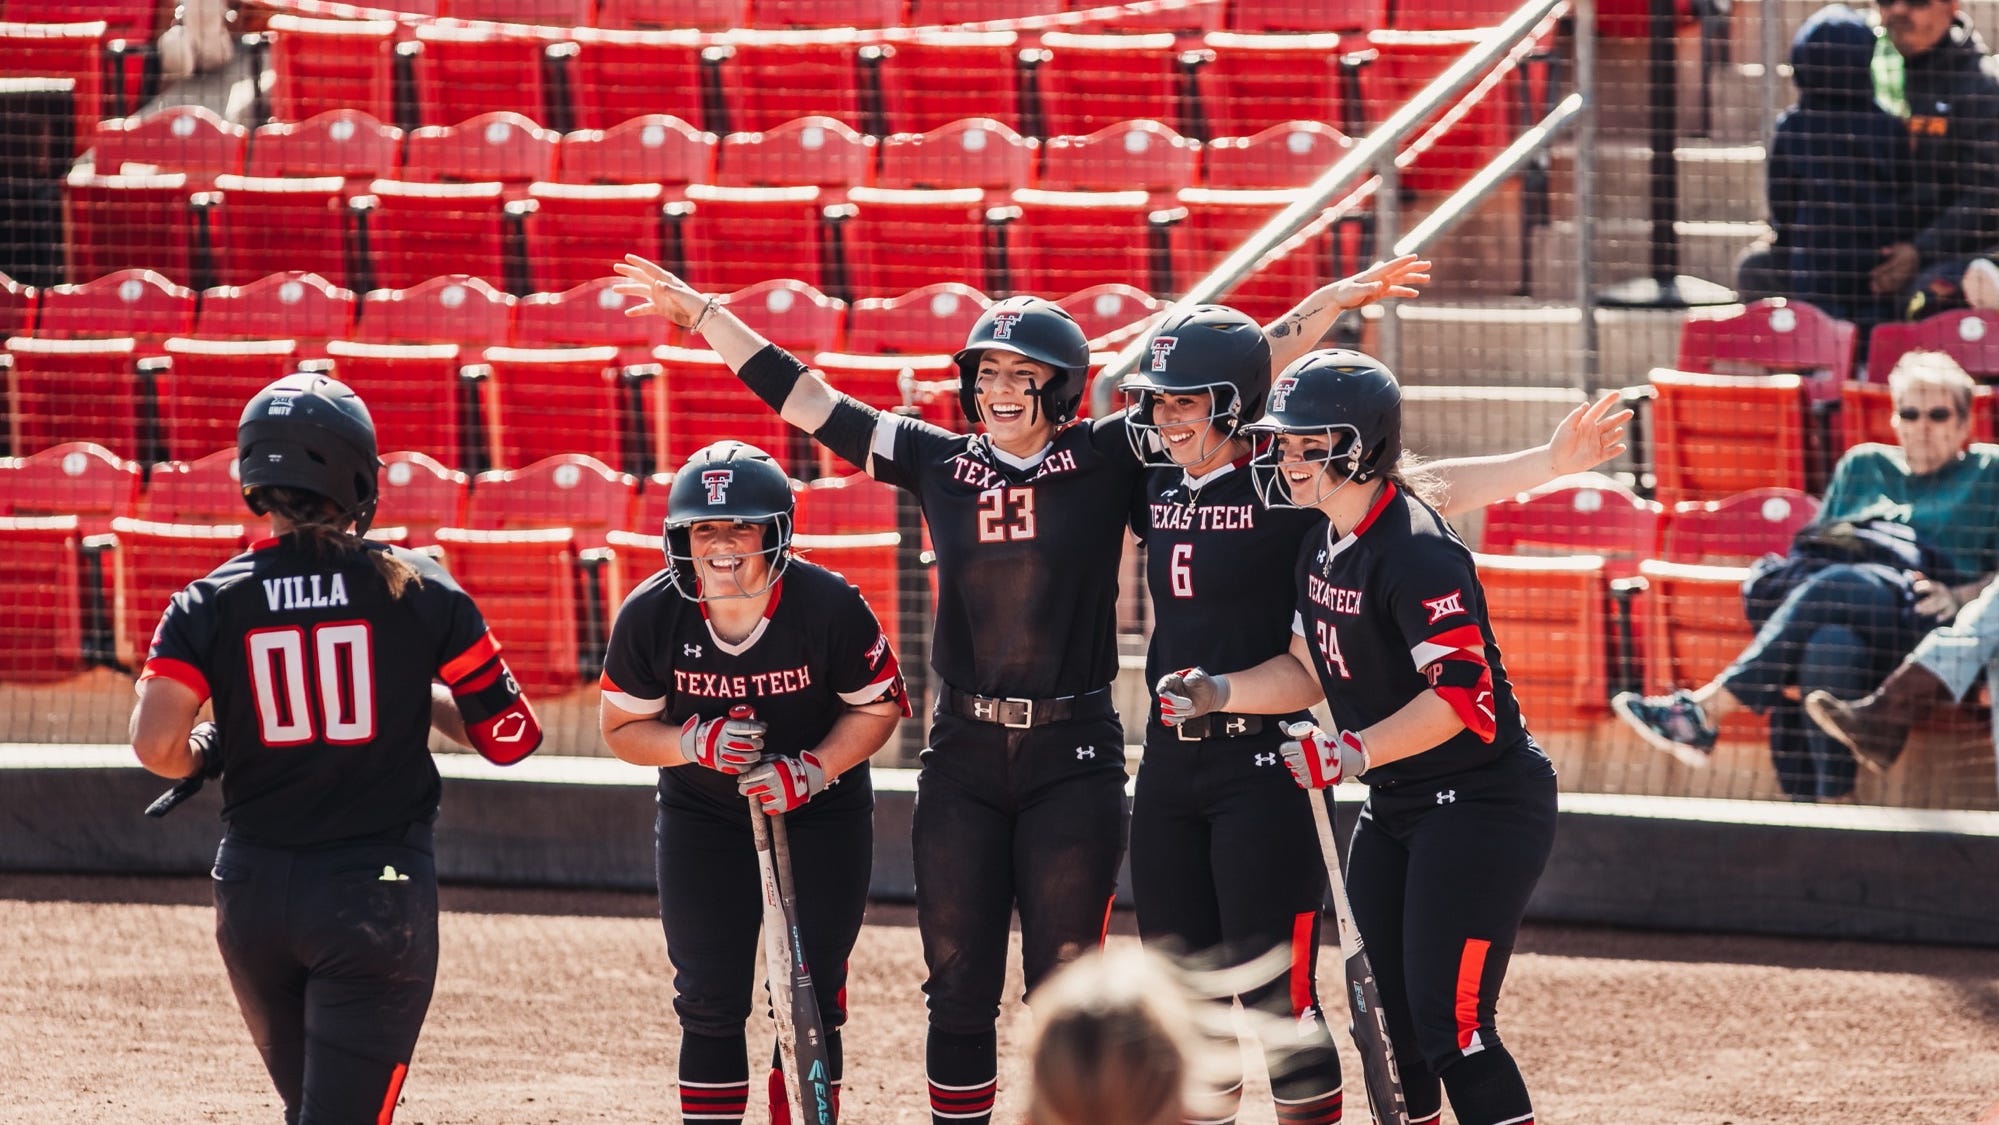 Matador Club offering 10K contracts to all Texas Tech softball players